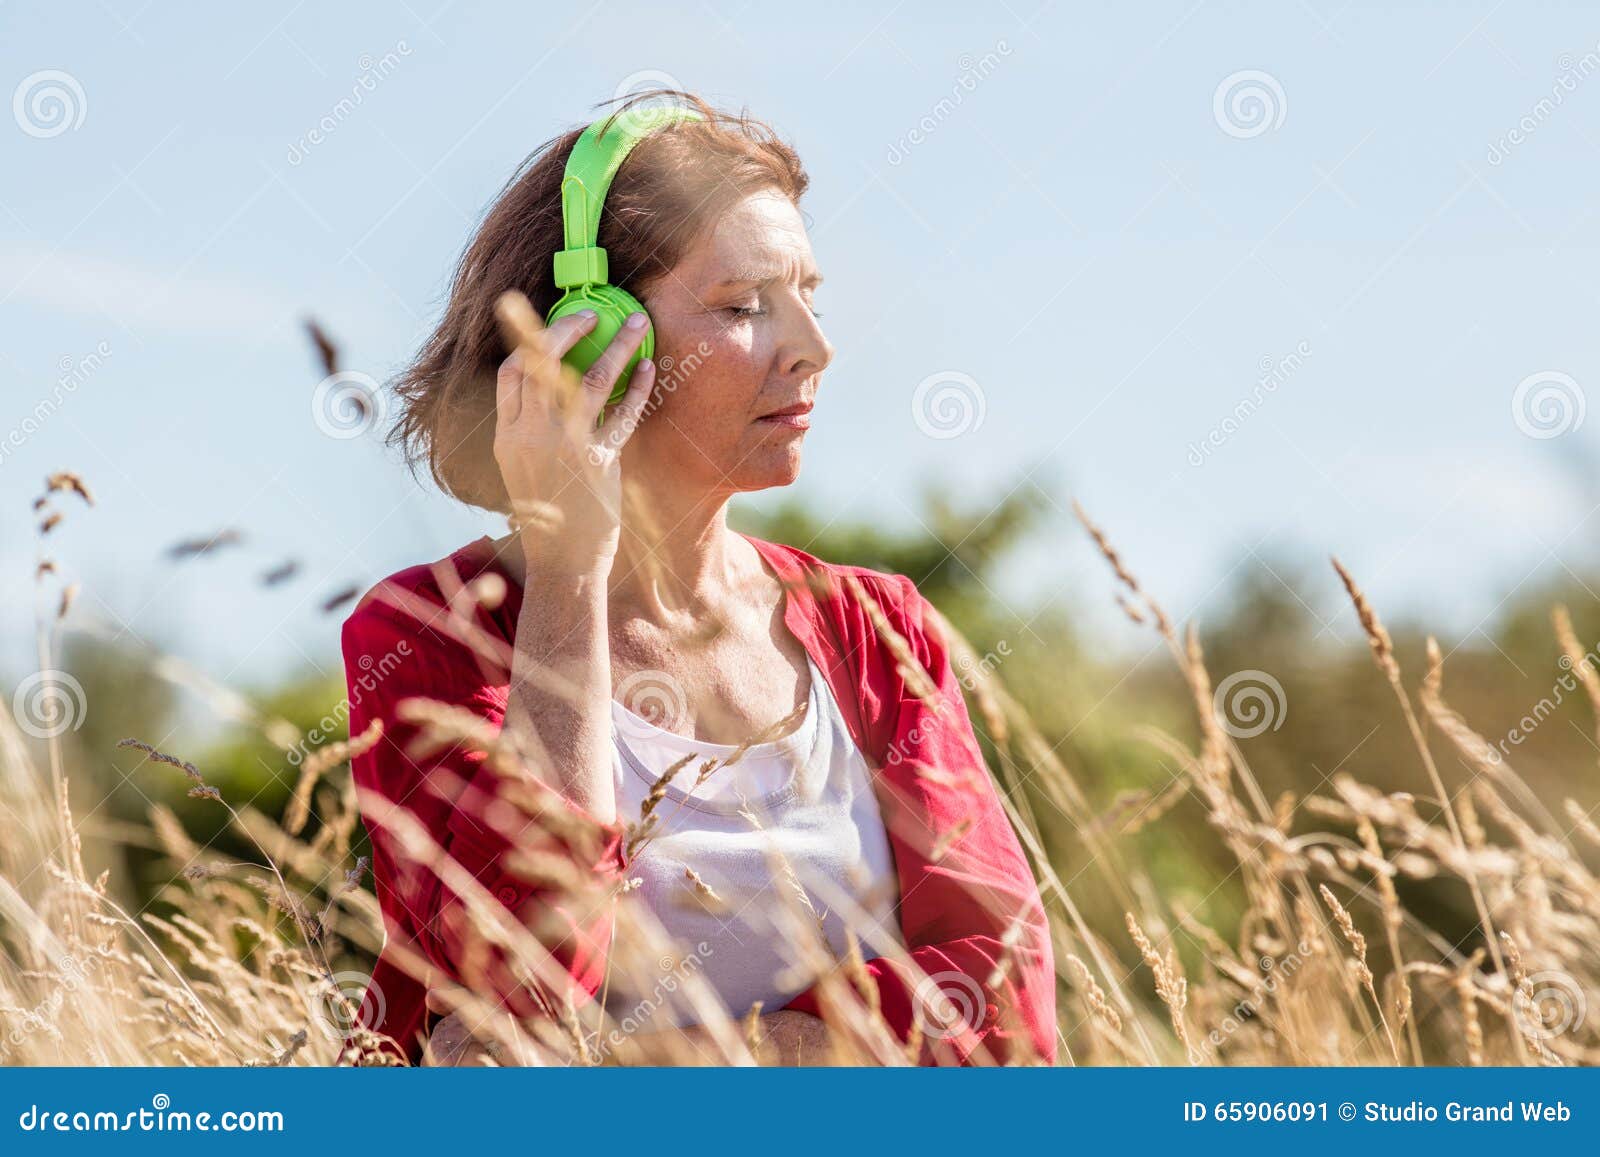 middle aged woman enjoying quietness with music outdoors